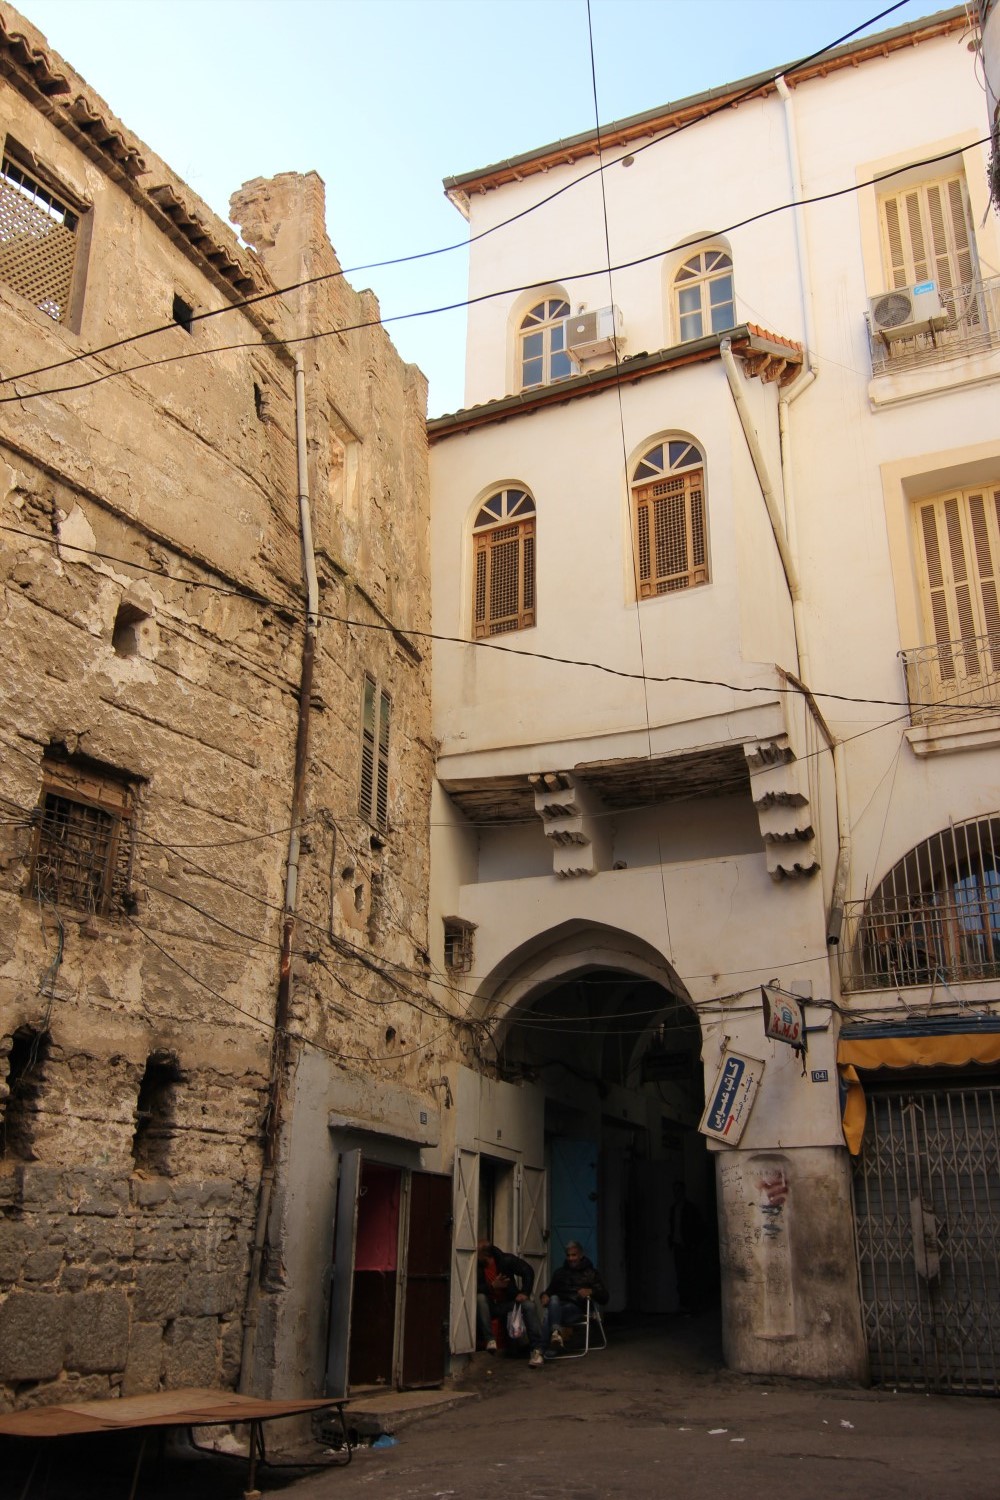 Rue Mellah Slimane, view of corbellings above arched street